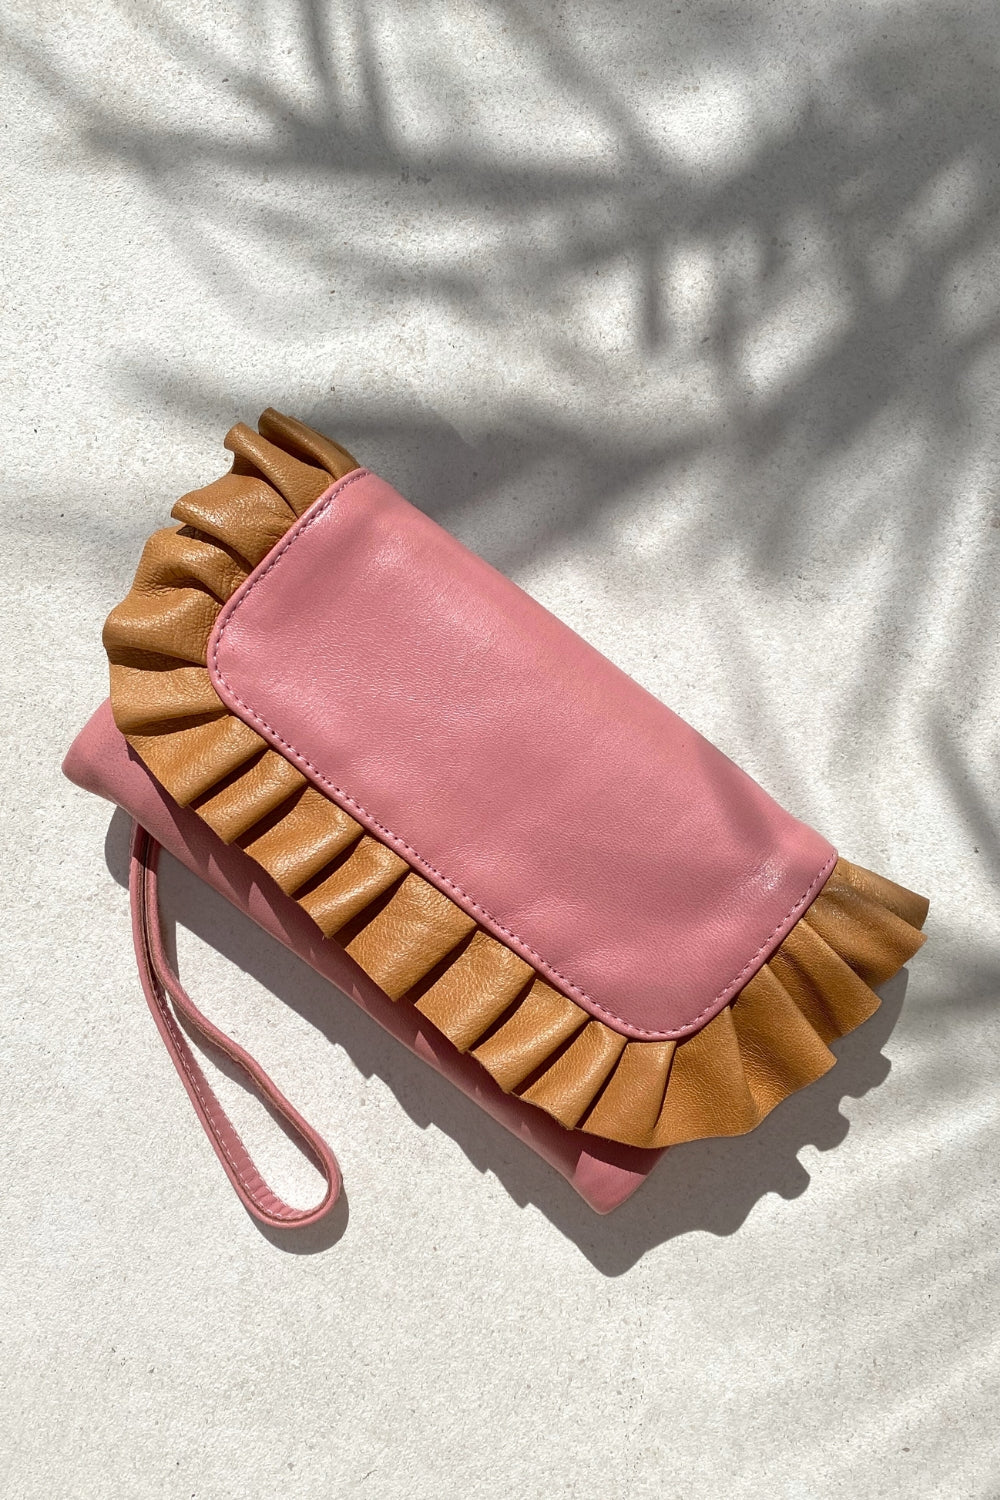 Hold me closer clutch - Pink and Tan